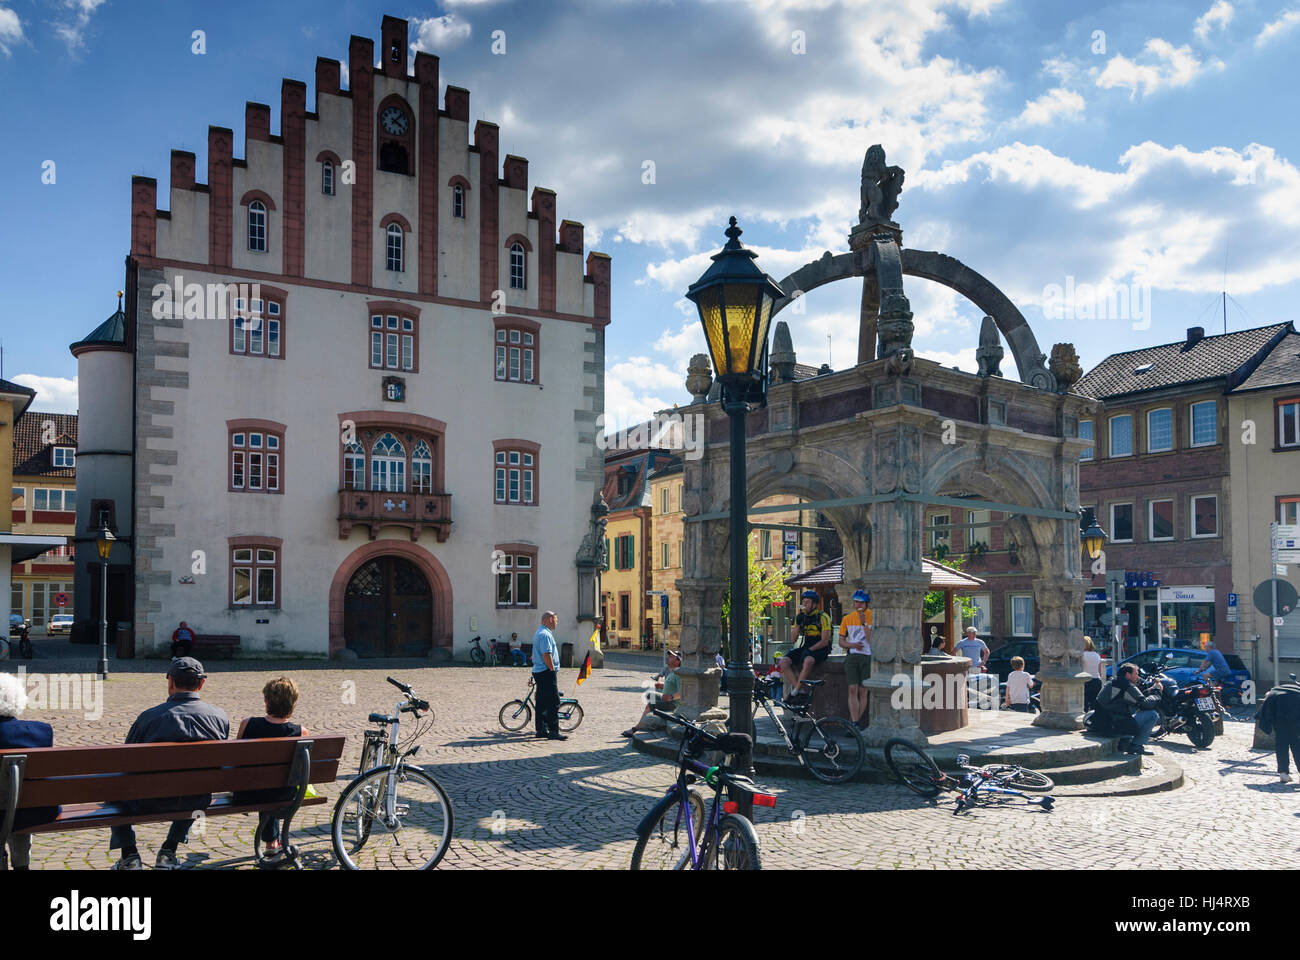 Hammelburg: Market square with town hall and market fountain, Unterfranken, Lower Franconia, Bayern, Bavaria, Germany Stock Photo